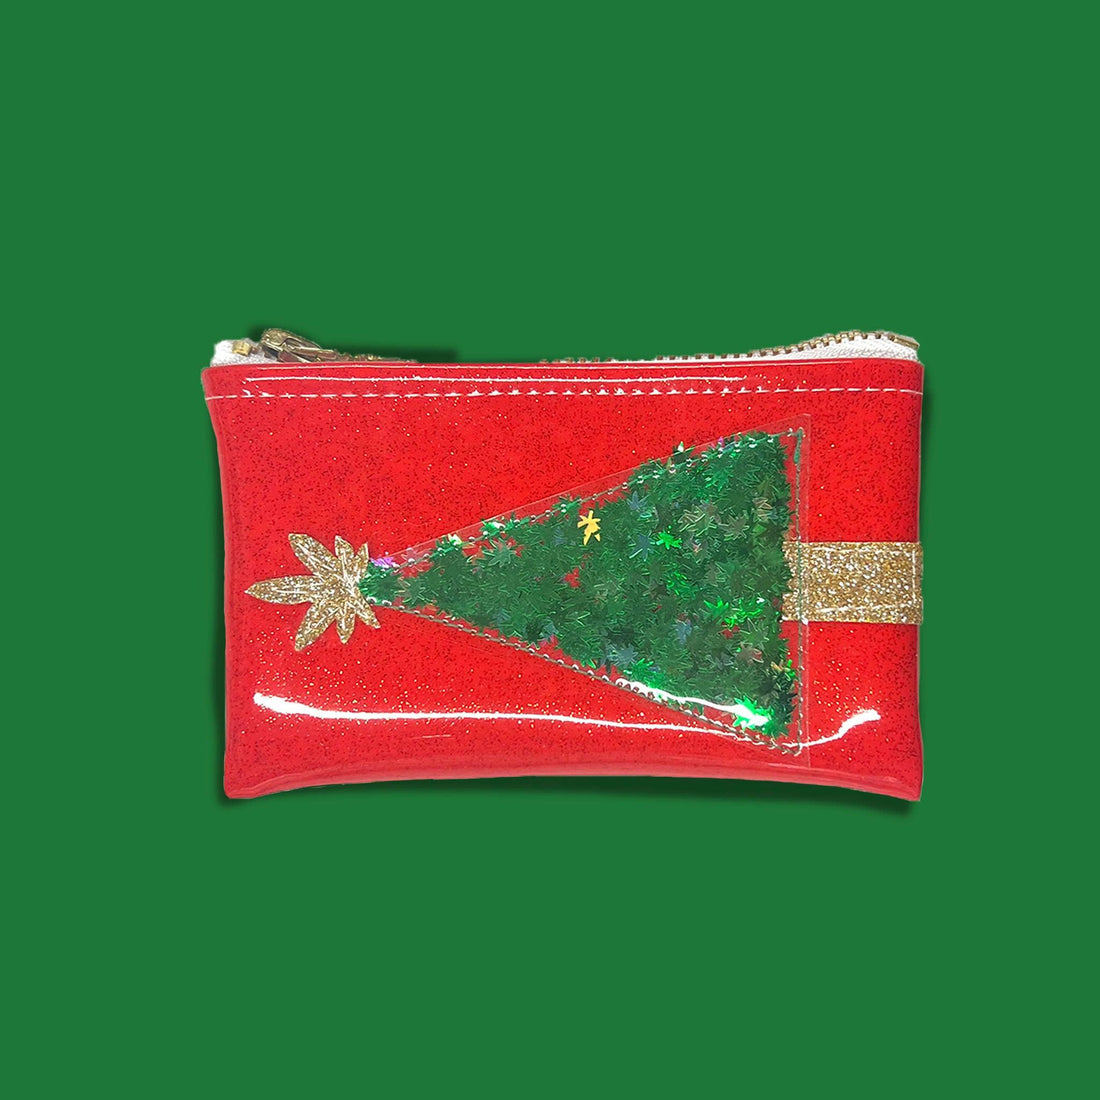 The Holiday Kush Klutch is a Red Zippered Pouch with a Pot Leaf Confetti Christmas Tree